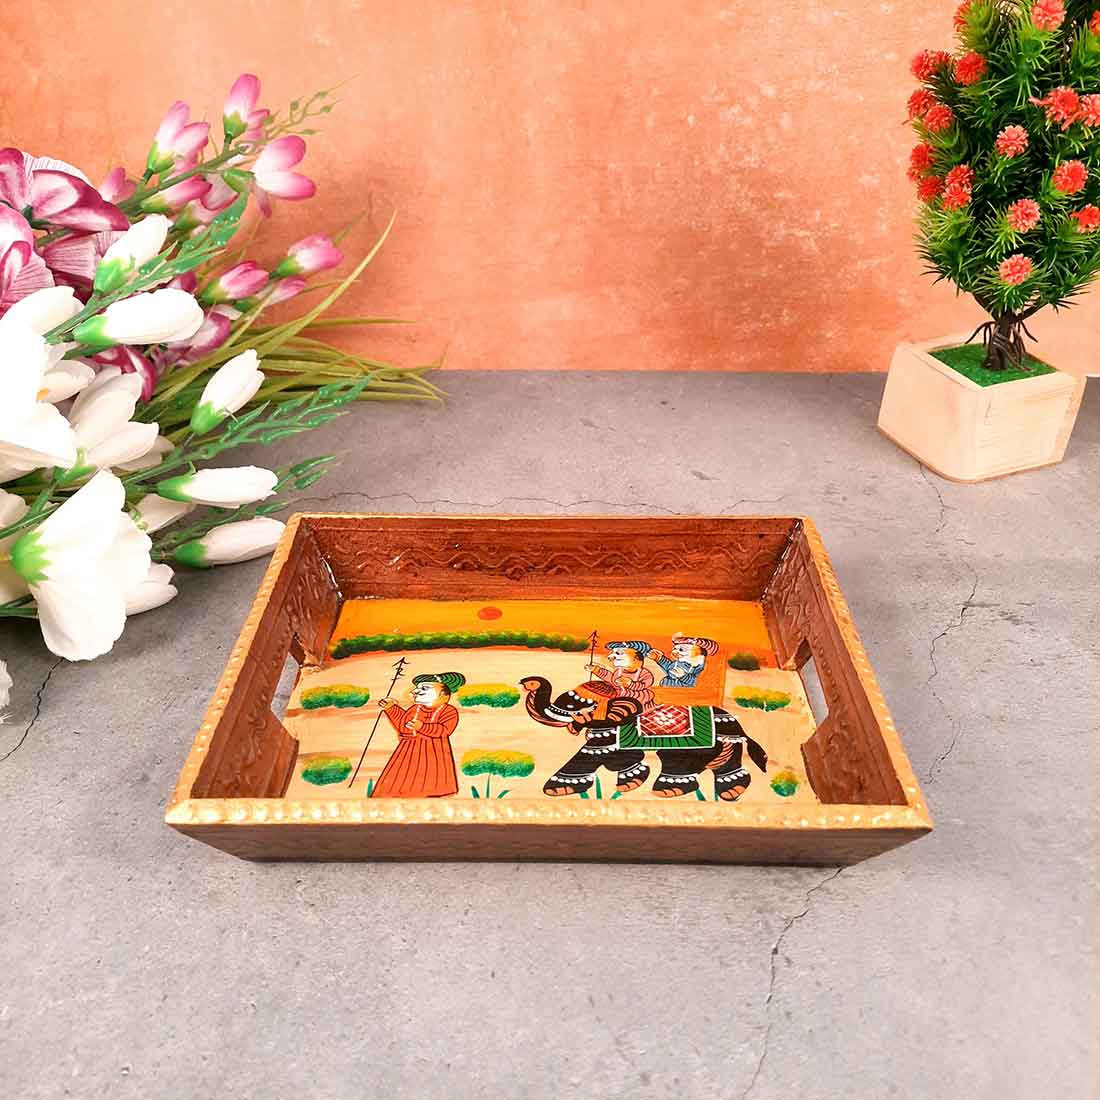 Decorative Tray | Wooden Serving Tray - For Tea & Snack Serving and Organising - 9 Inch - Apkamart#Style_Pack of 3